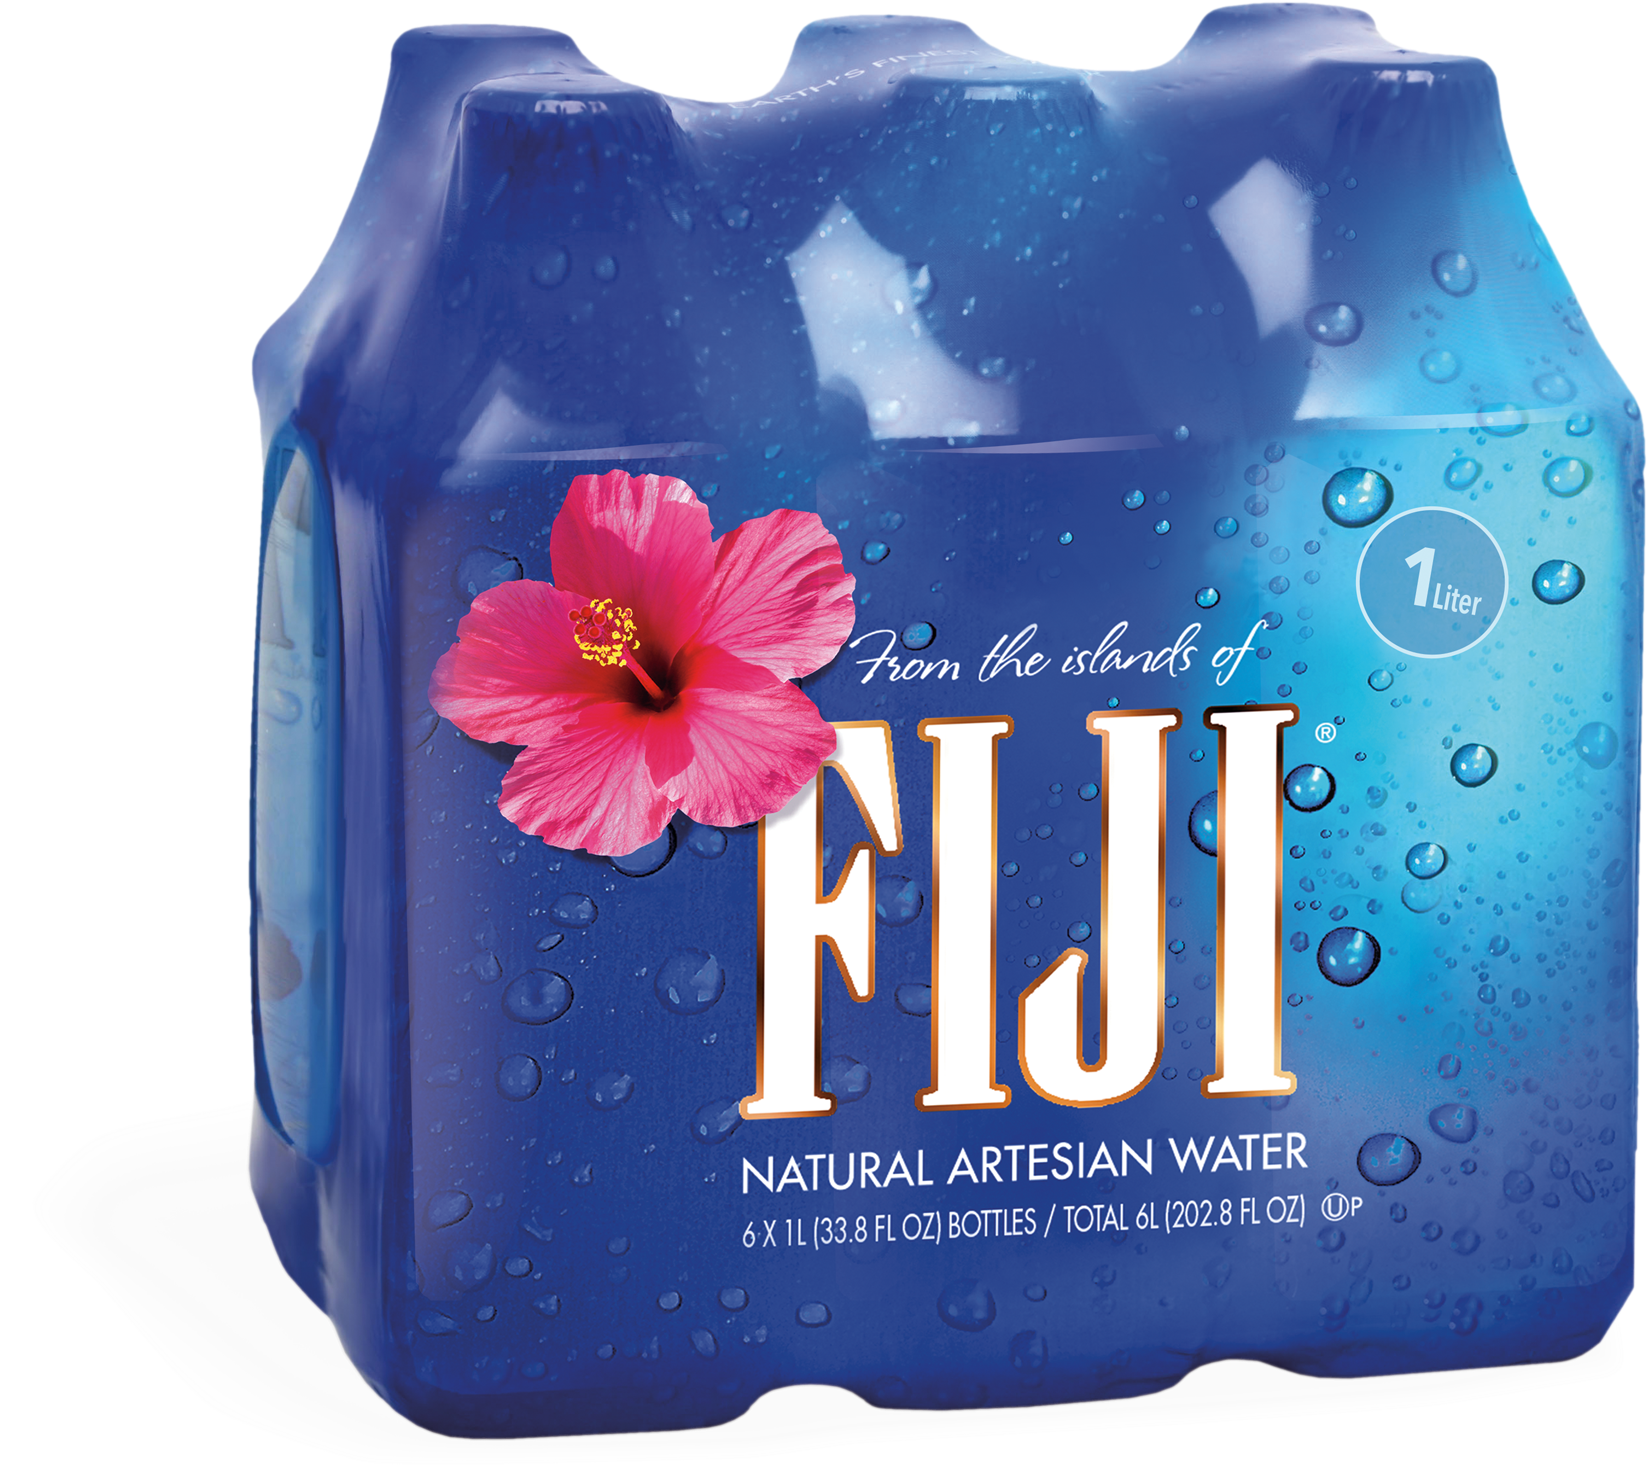 A Blue Beverage Bottle With Water Drops And A Pink Flower